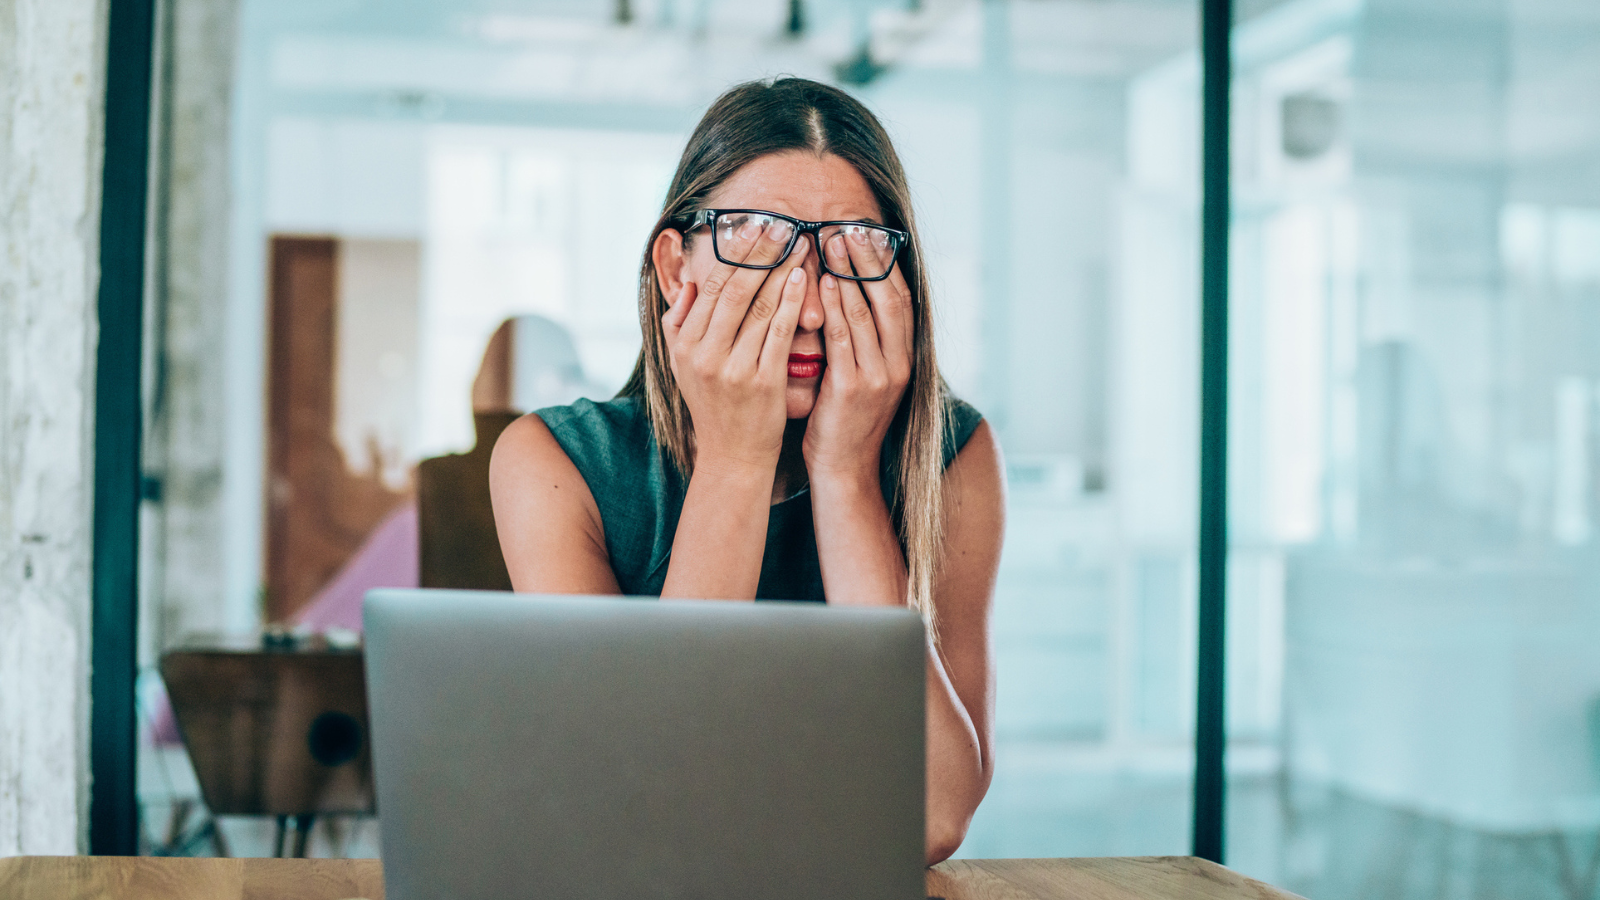 Job fatigue: Am I suffering from burnout at work? Ask HR